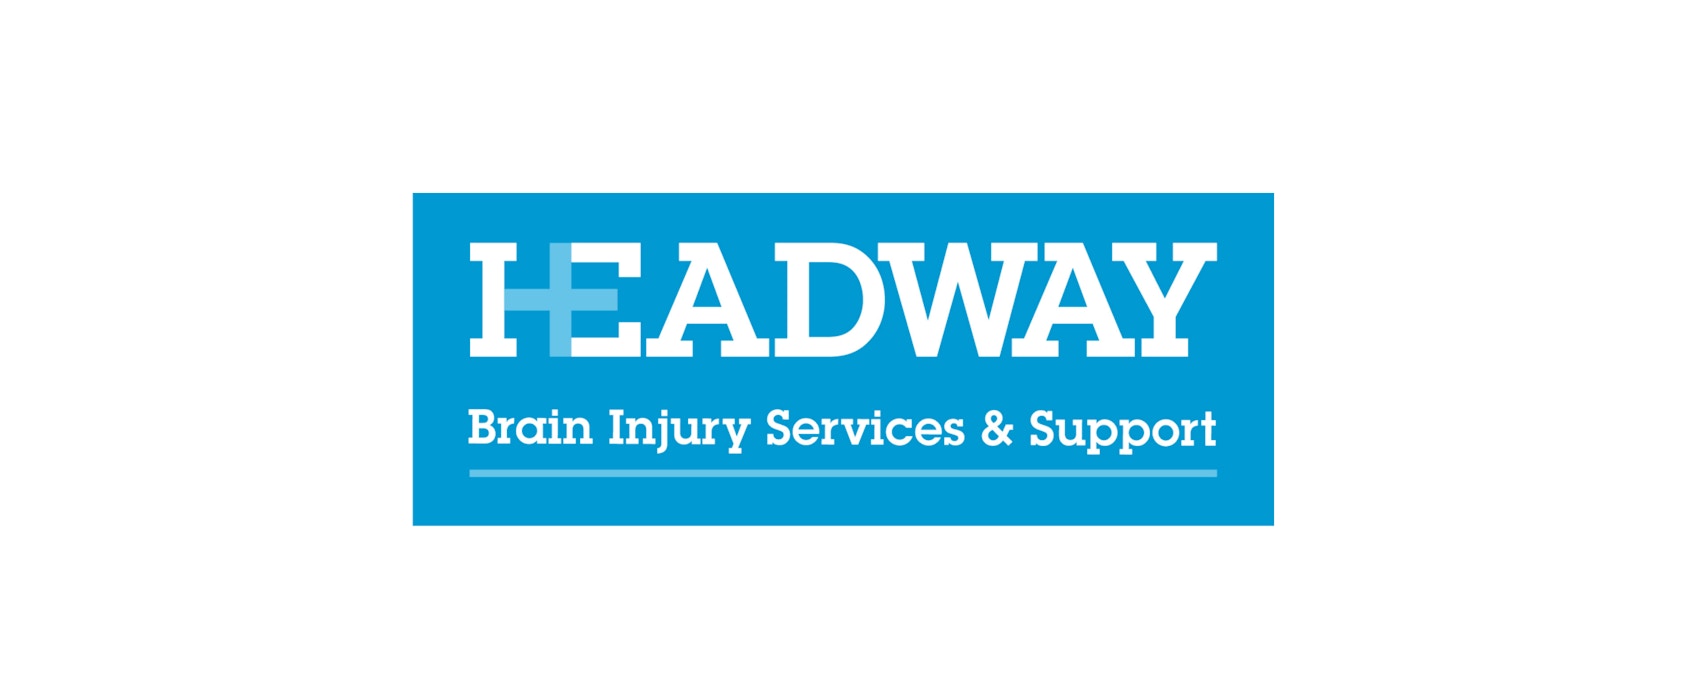 Supporting stroke survivors and their families – My role in Headway